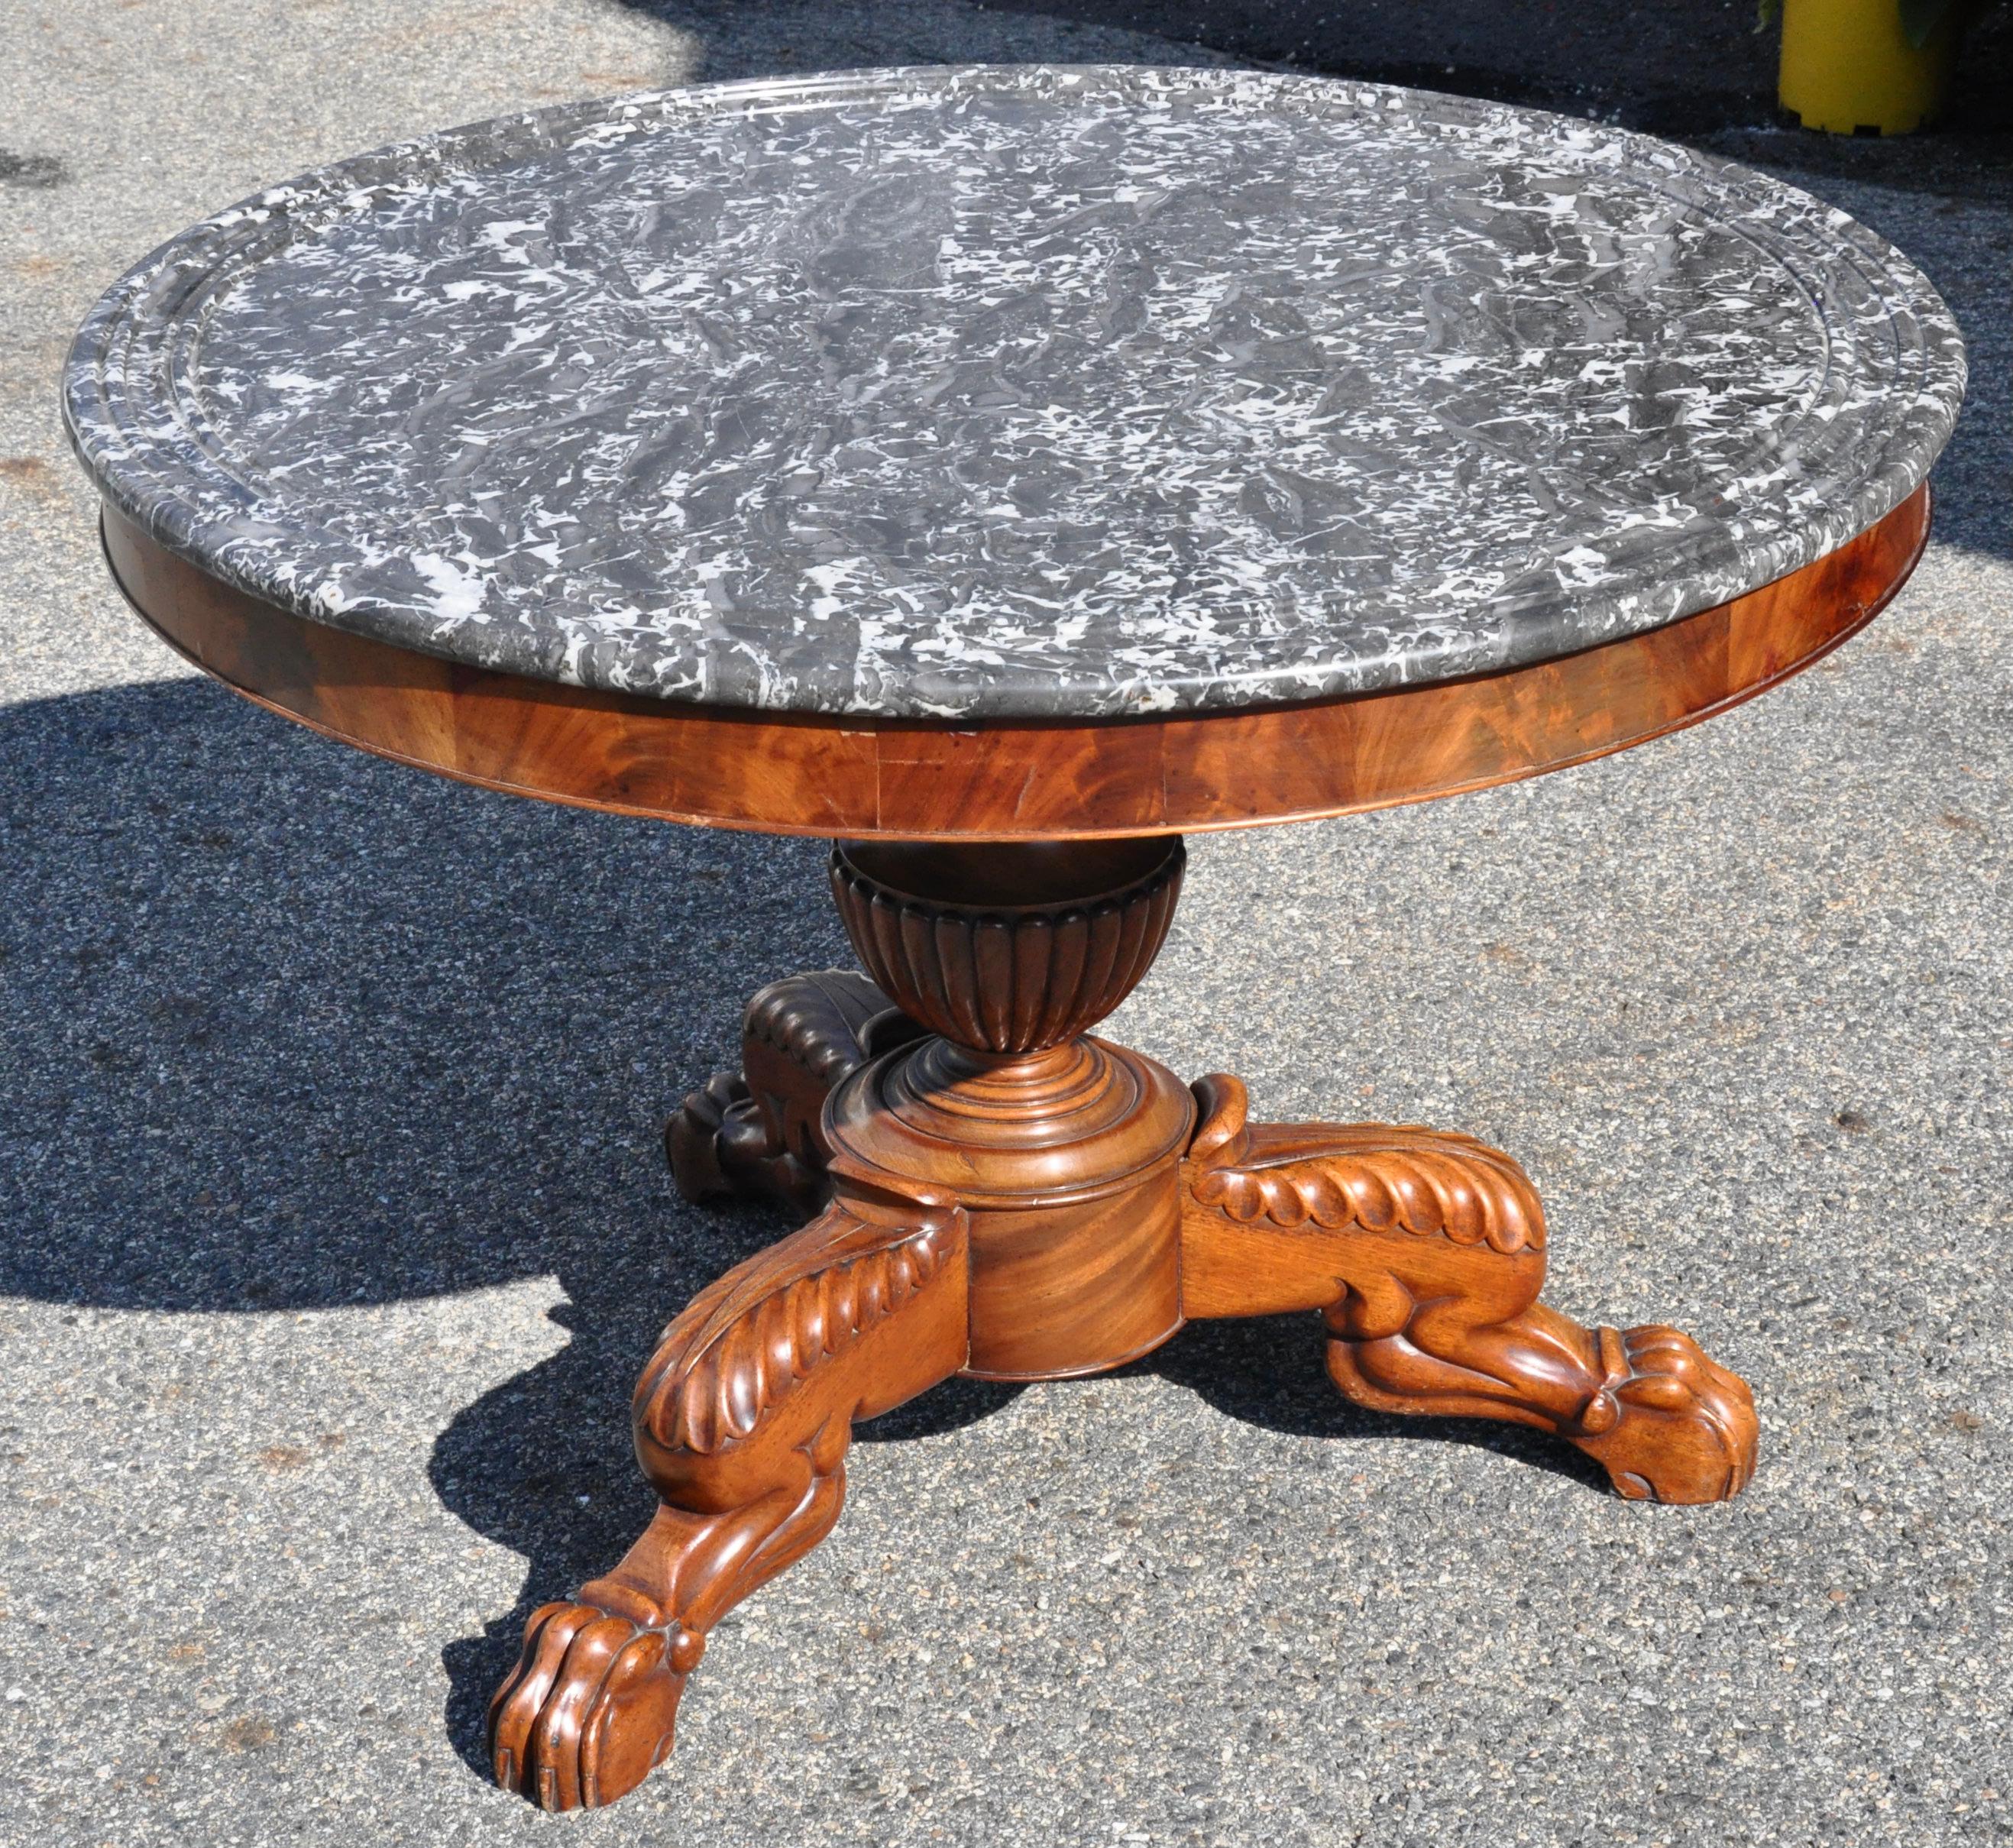 Period early 19th century marble top mahogany center table. Baluster shaft with original marble top and paw lion legs.